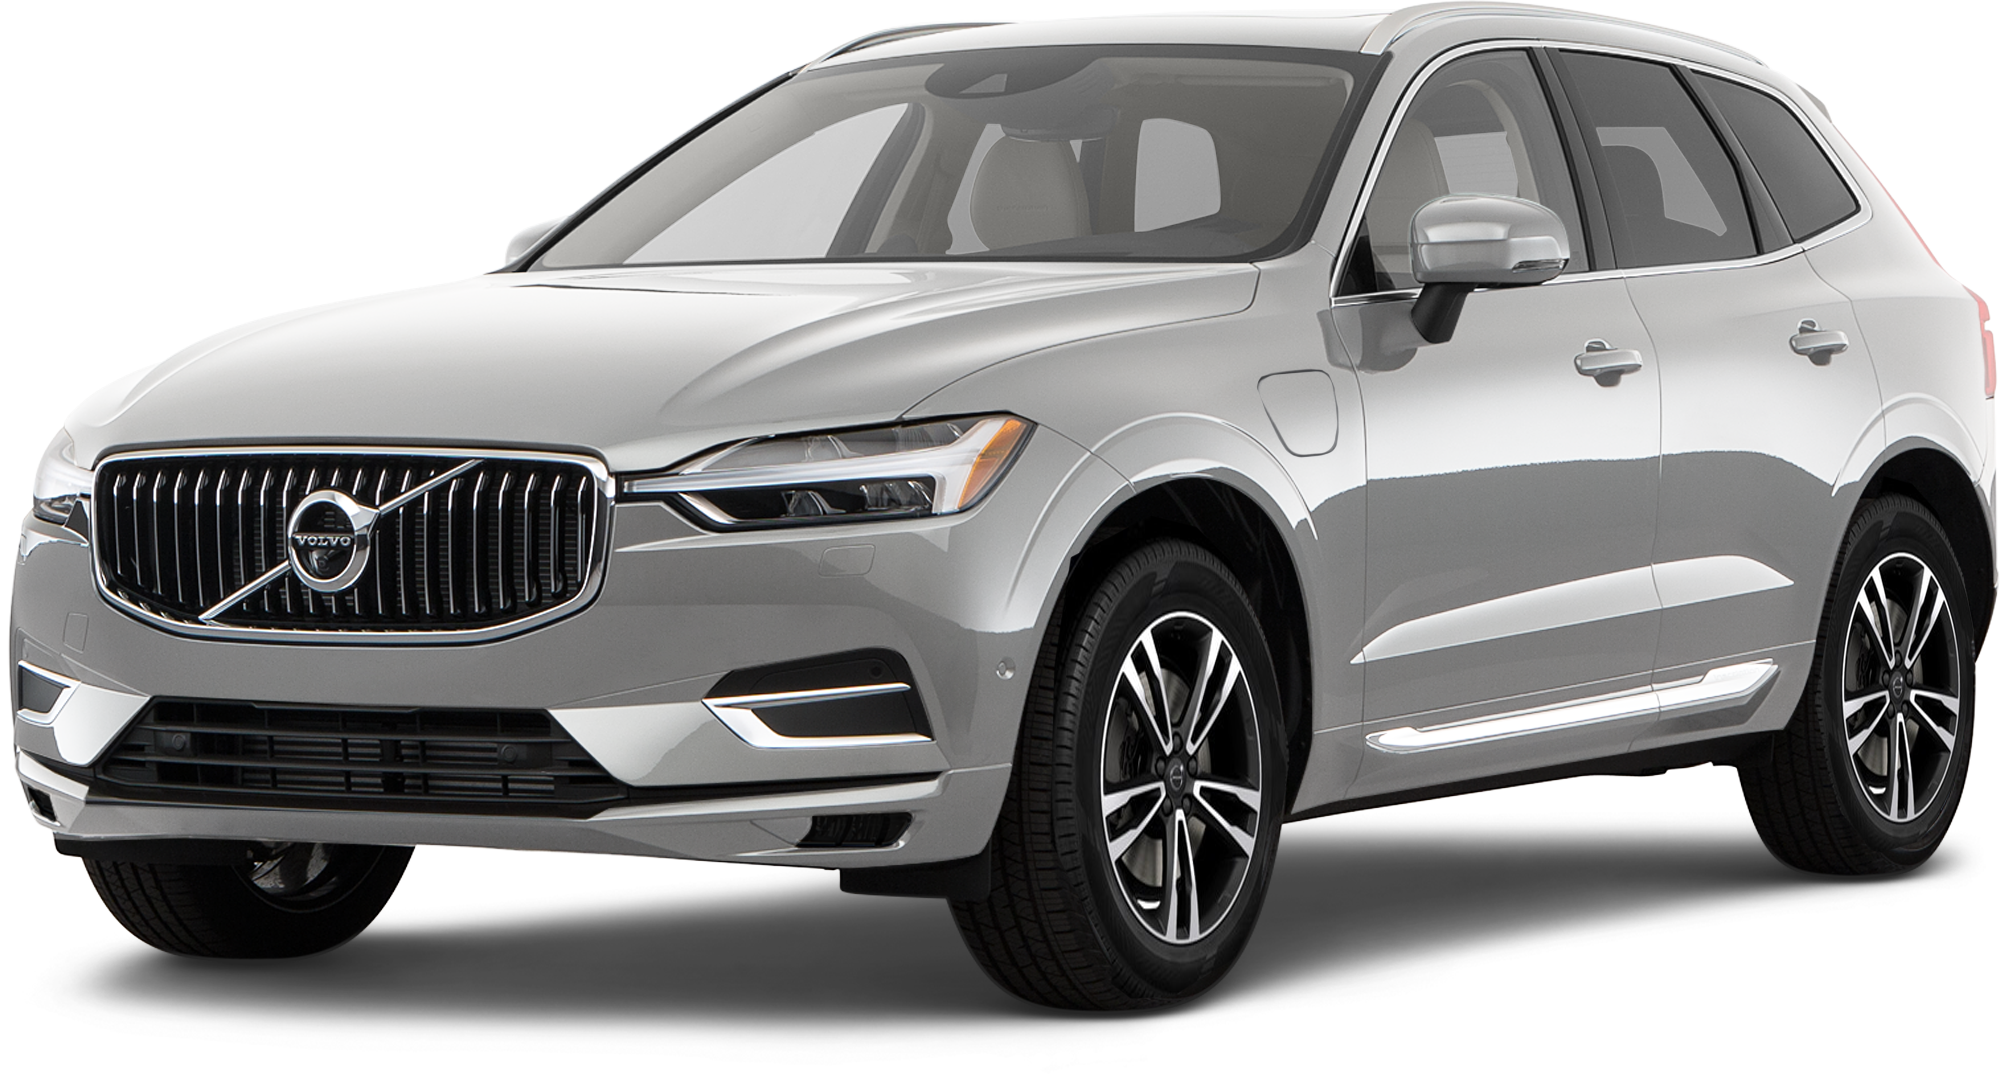 2020 Volvo XC60 Hybrid Incentives, Specials & Offers in Red Bank NJ